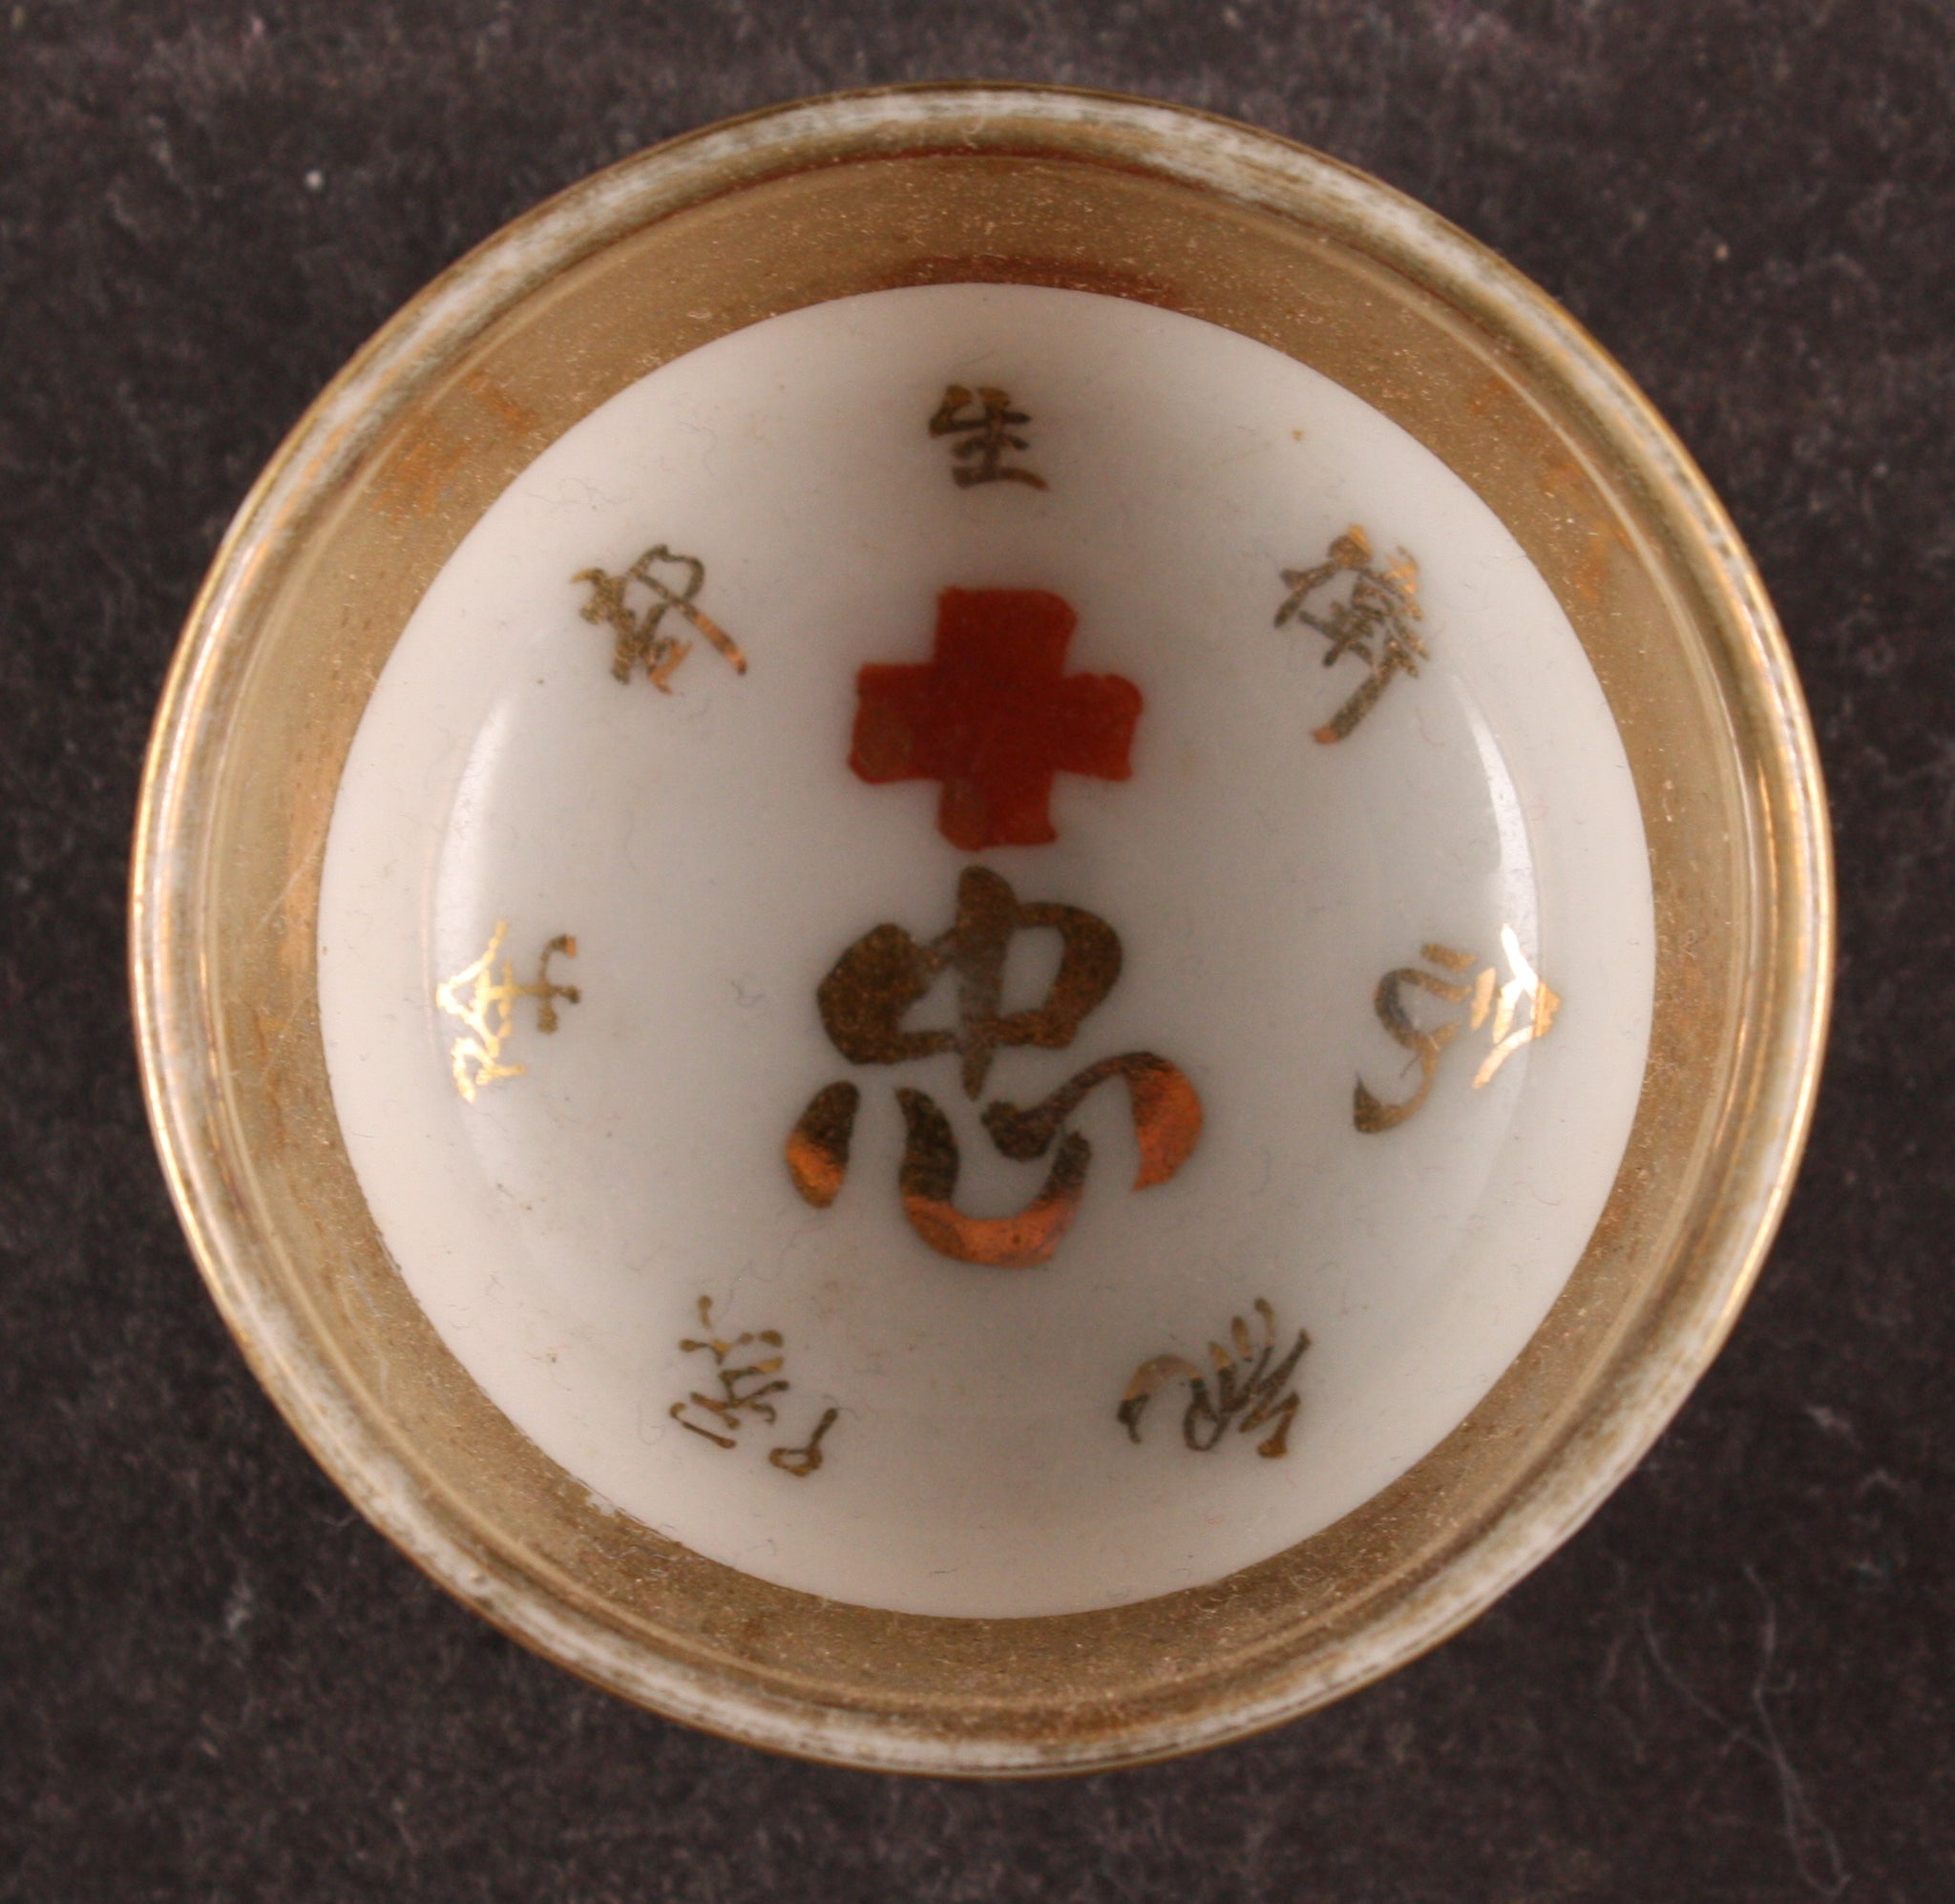 Antique Japanese Military Red Cross Loyalty Medic Army Sake Cup